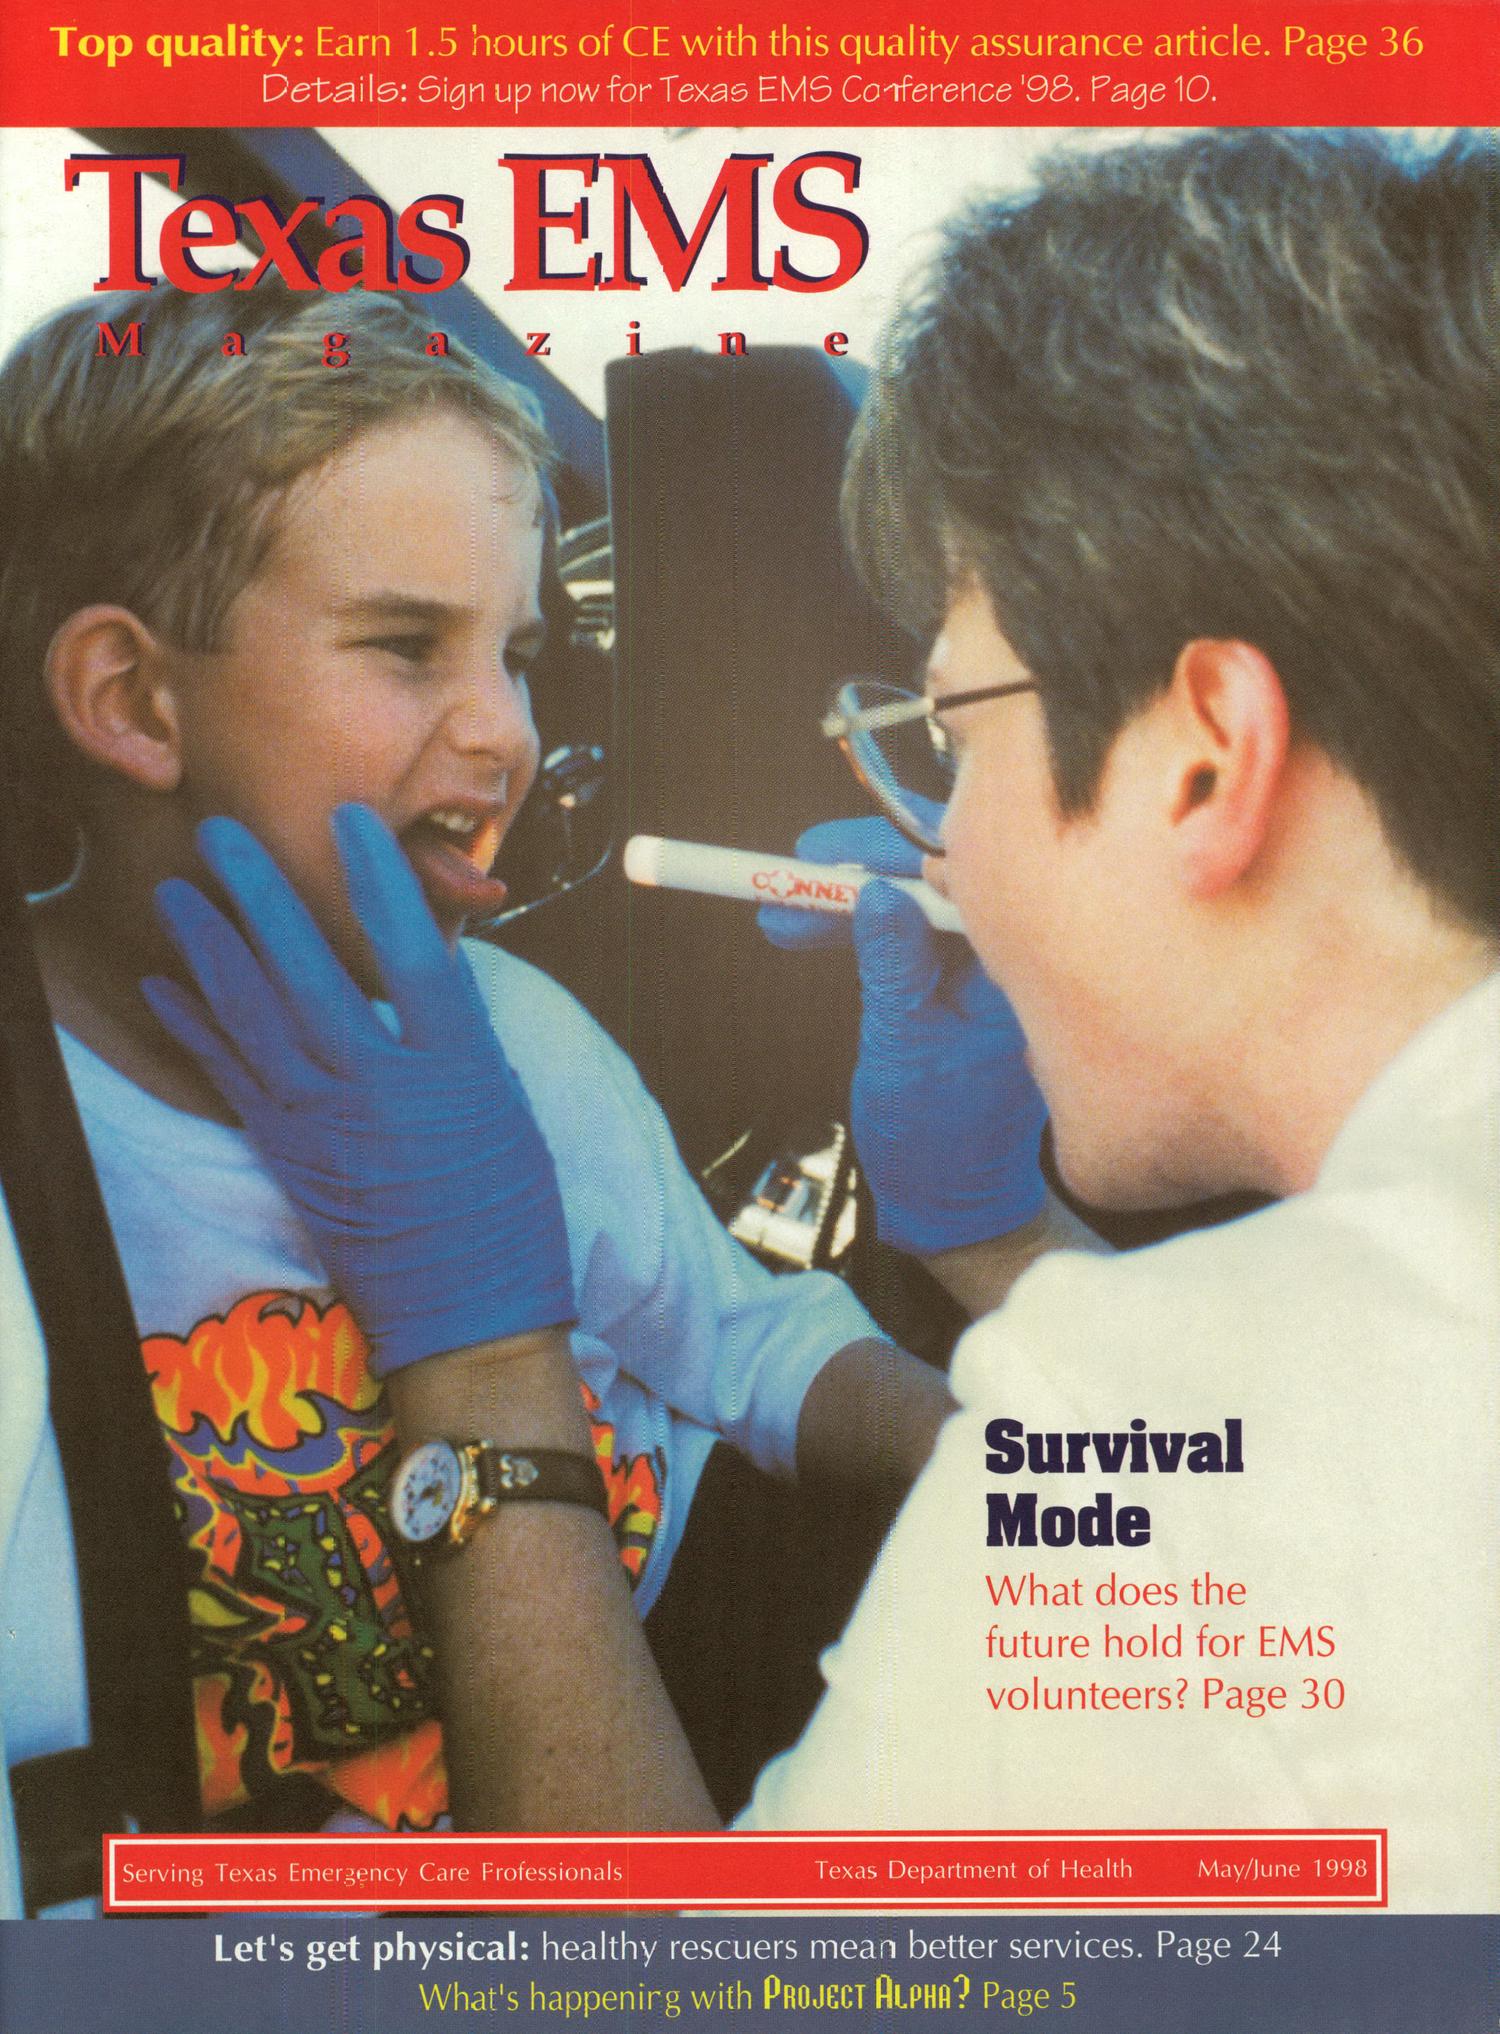 Texas EMS Magazine, Volume 19, Number 3, May/June 1998
                                                
                                                    FRONT COVER
                                                